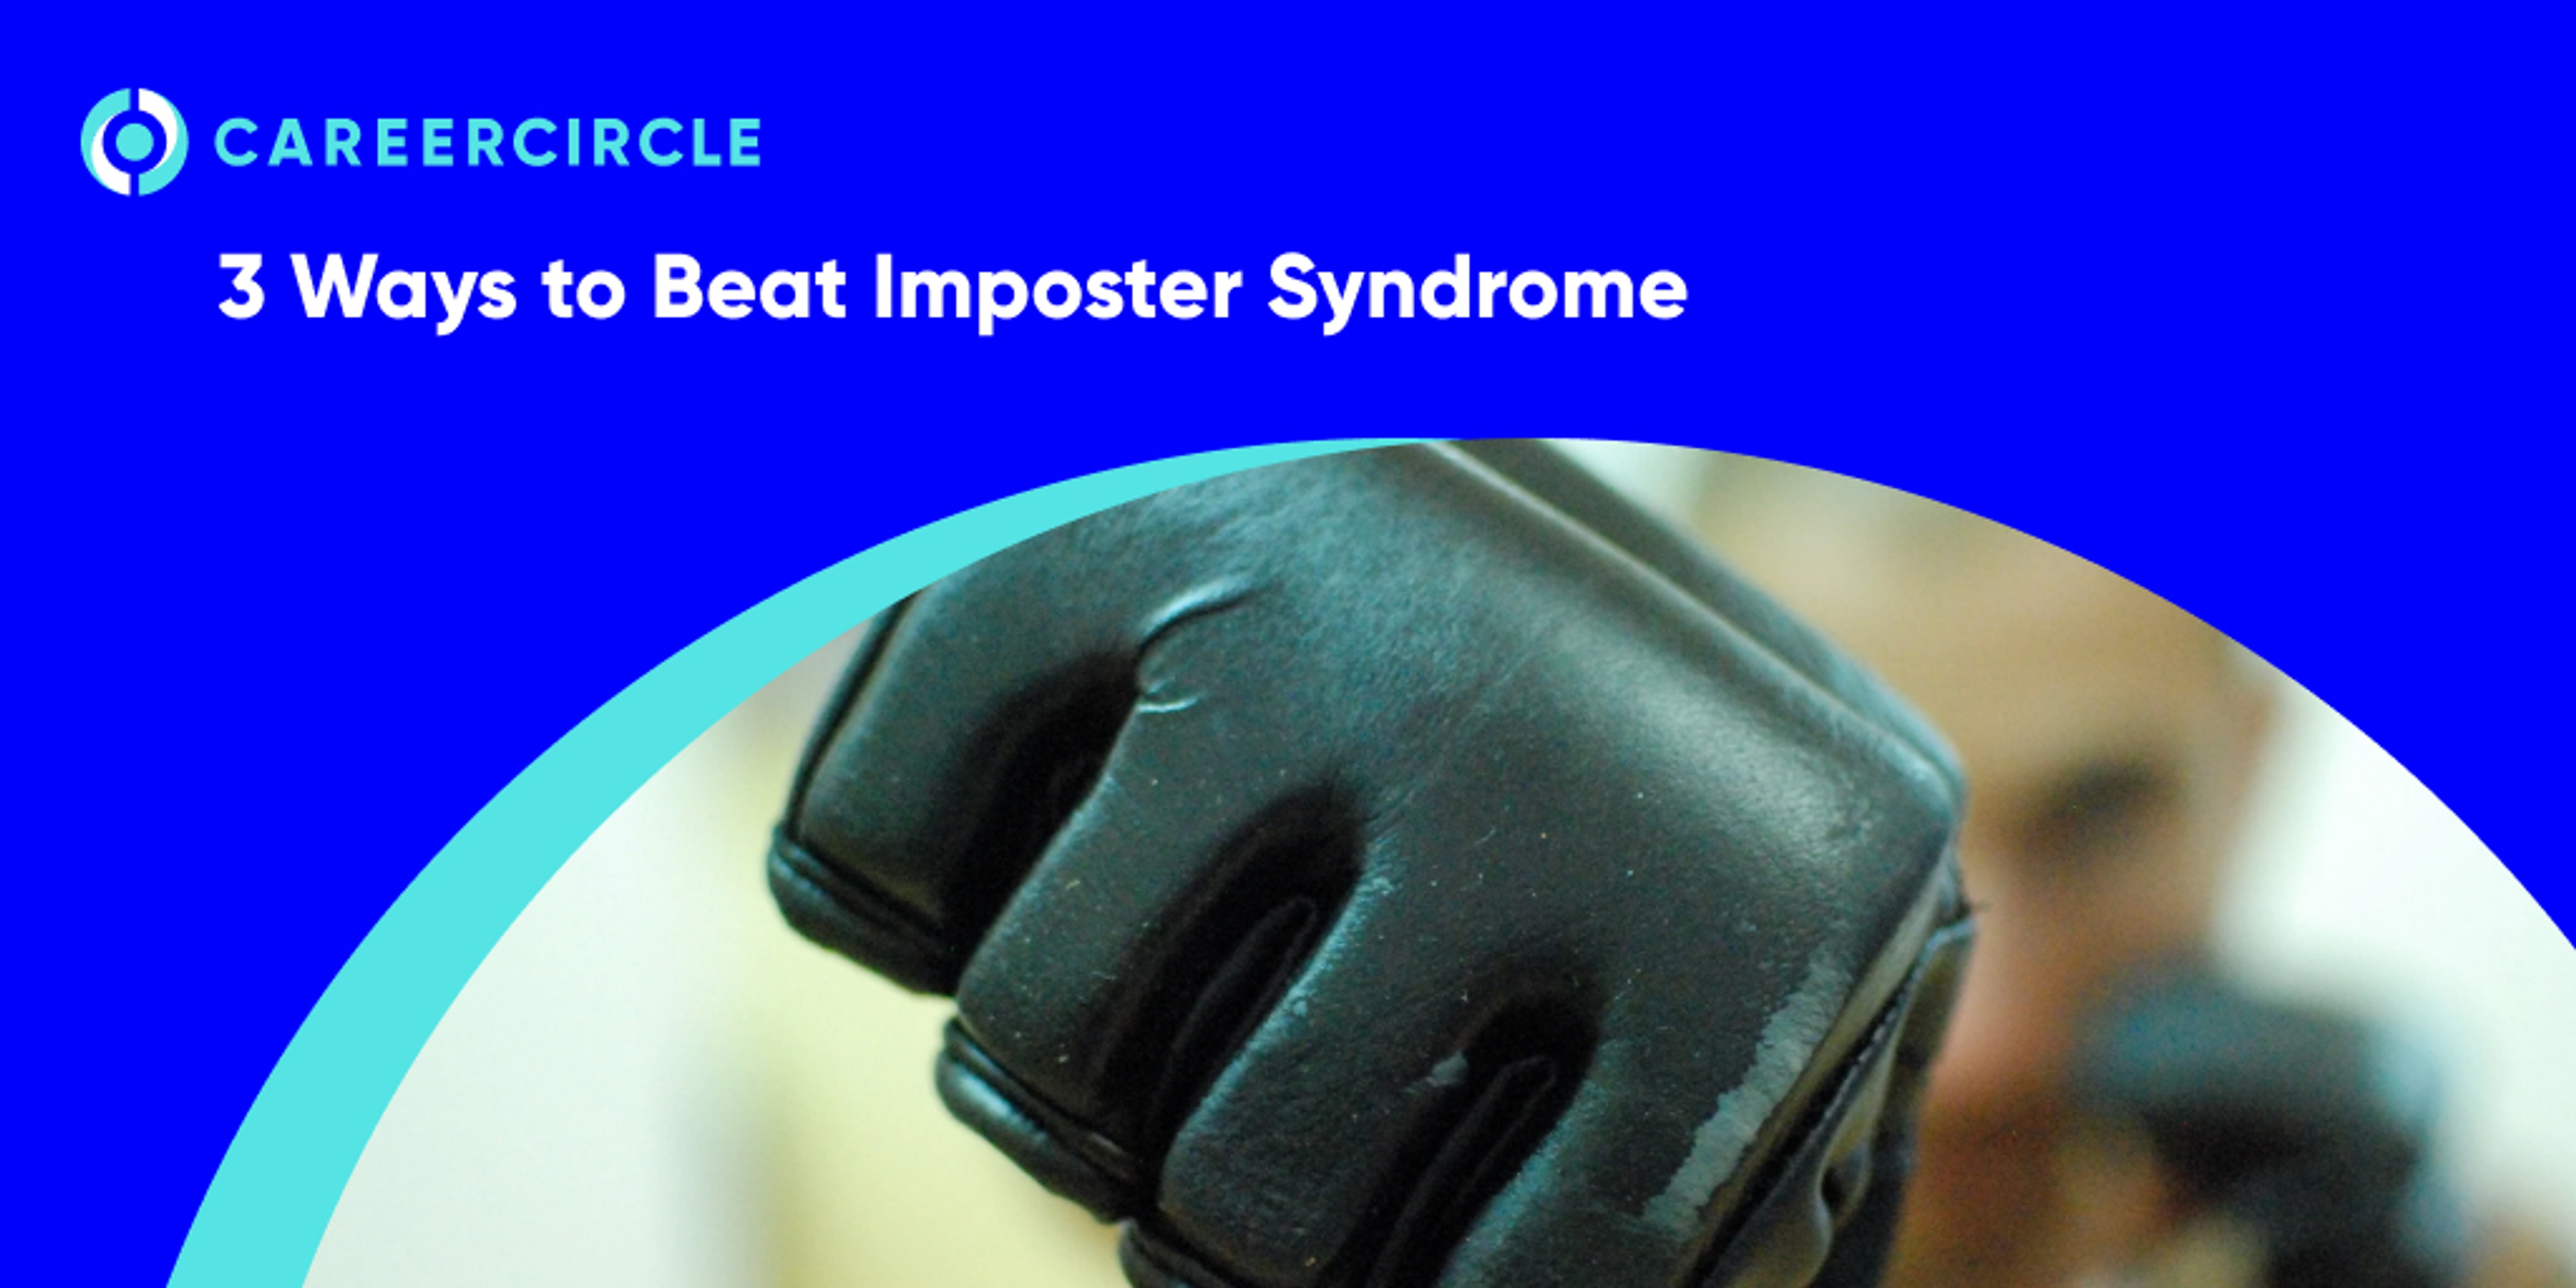 CareerCircle - "3 Ways to Beat Imposter Syndrome" with a image of a boxer putting out his fist